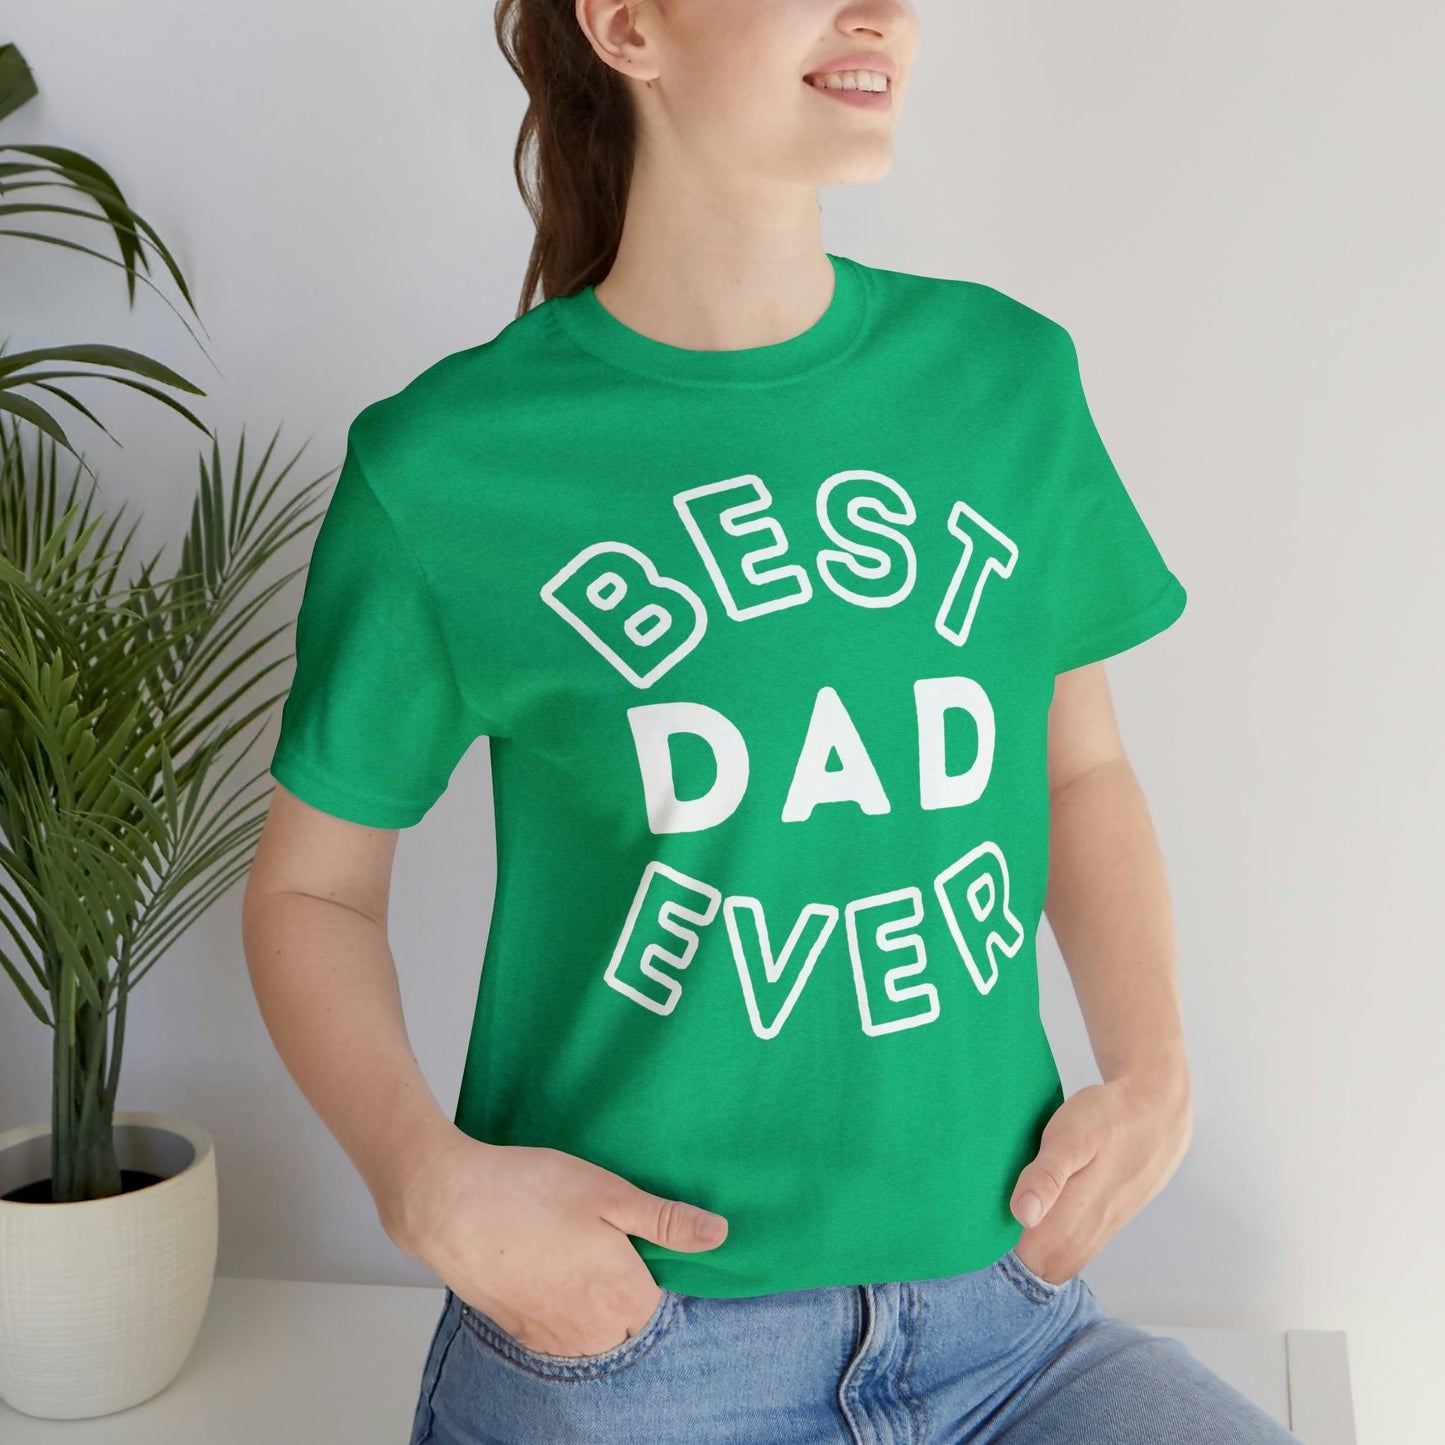 Dad Gift - Best Dad Gift - Best Super Dad Ever Shirt -Dad Shirt - Funny Fathers Gift - Husband Gift - Funny Dad Tshirt - Dad Birthday Gift